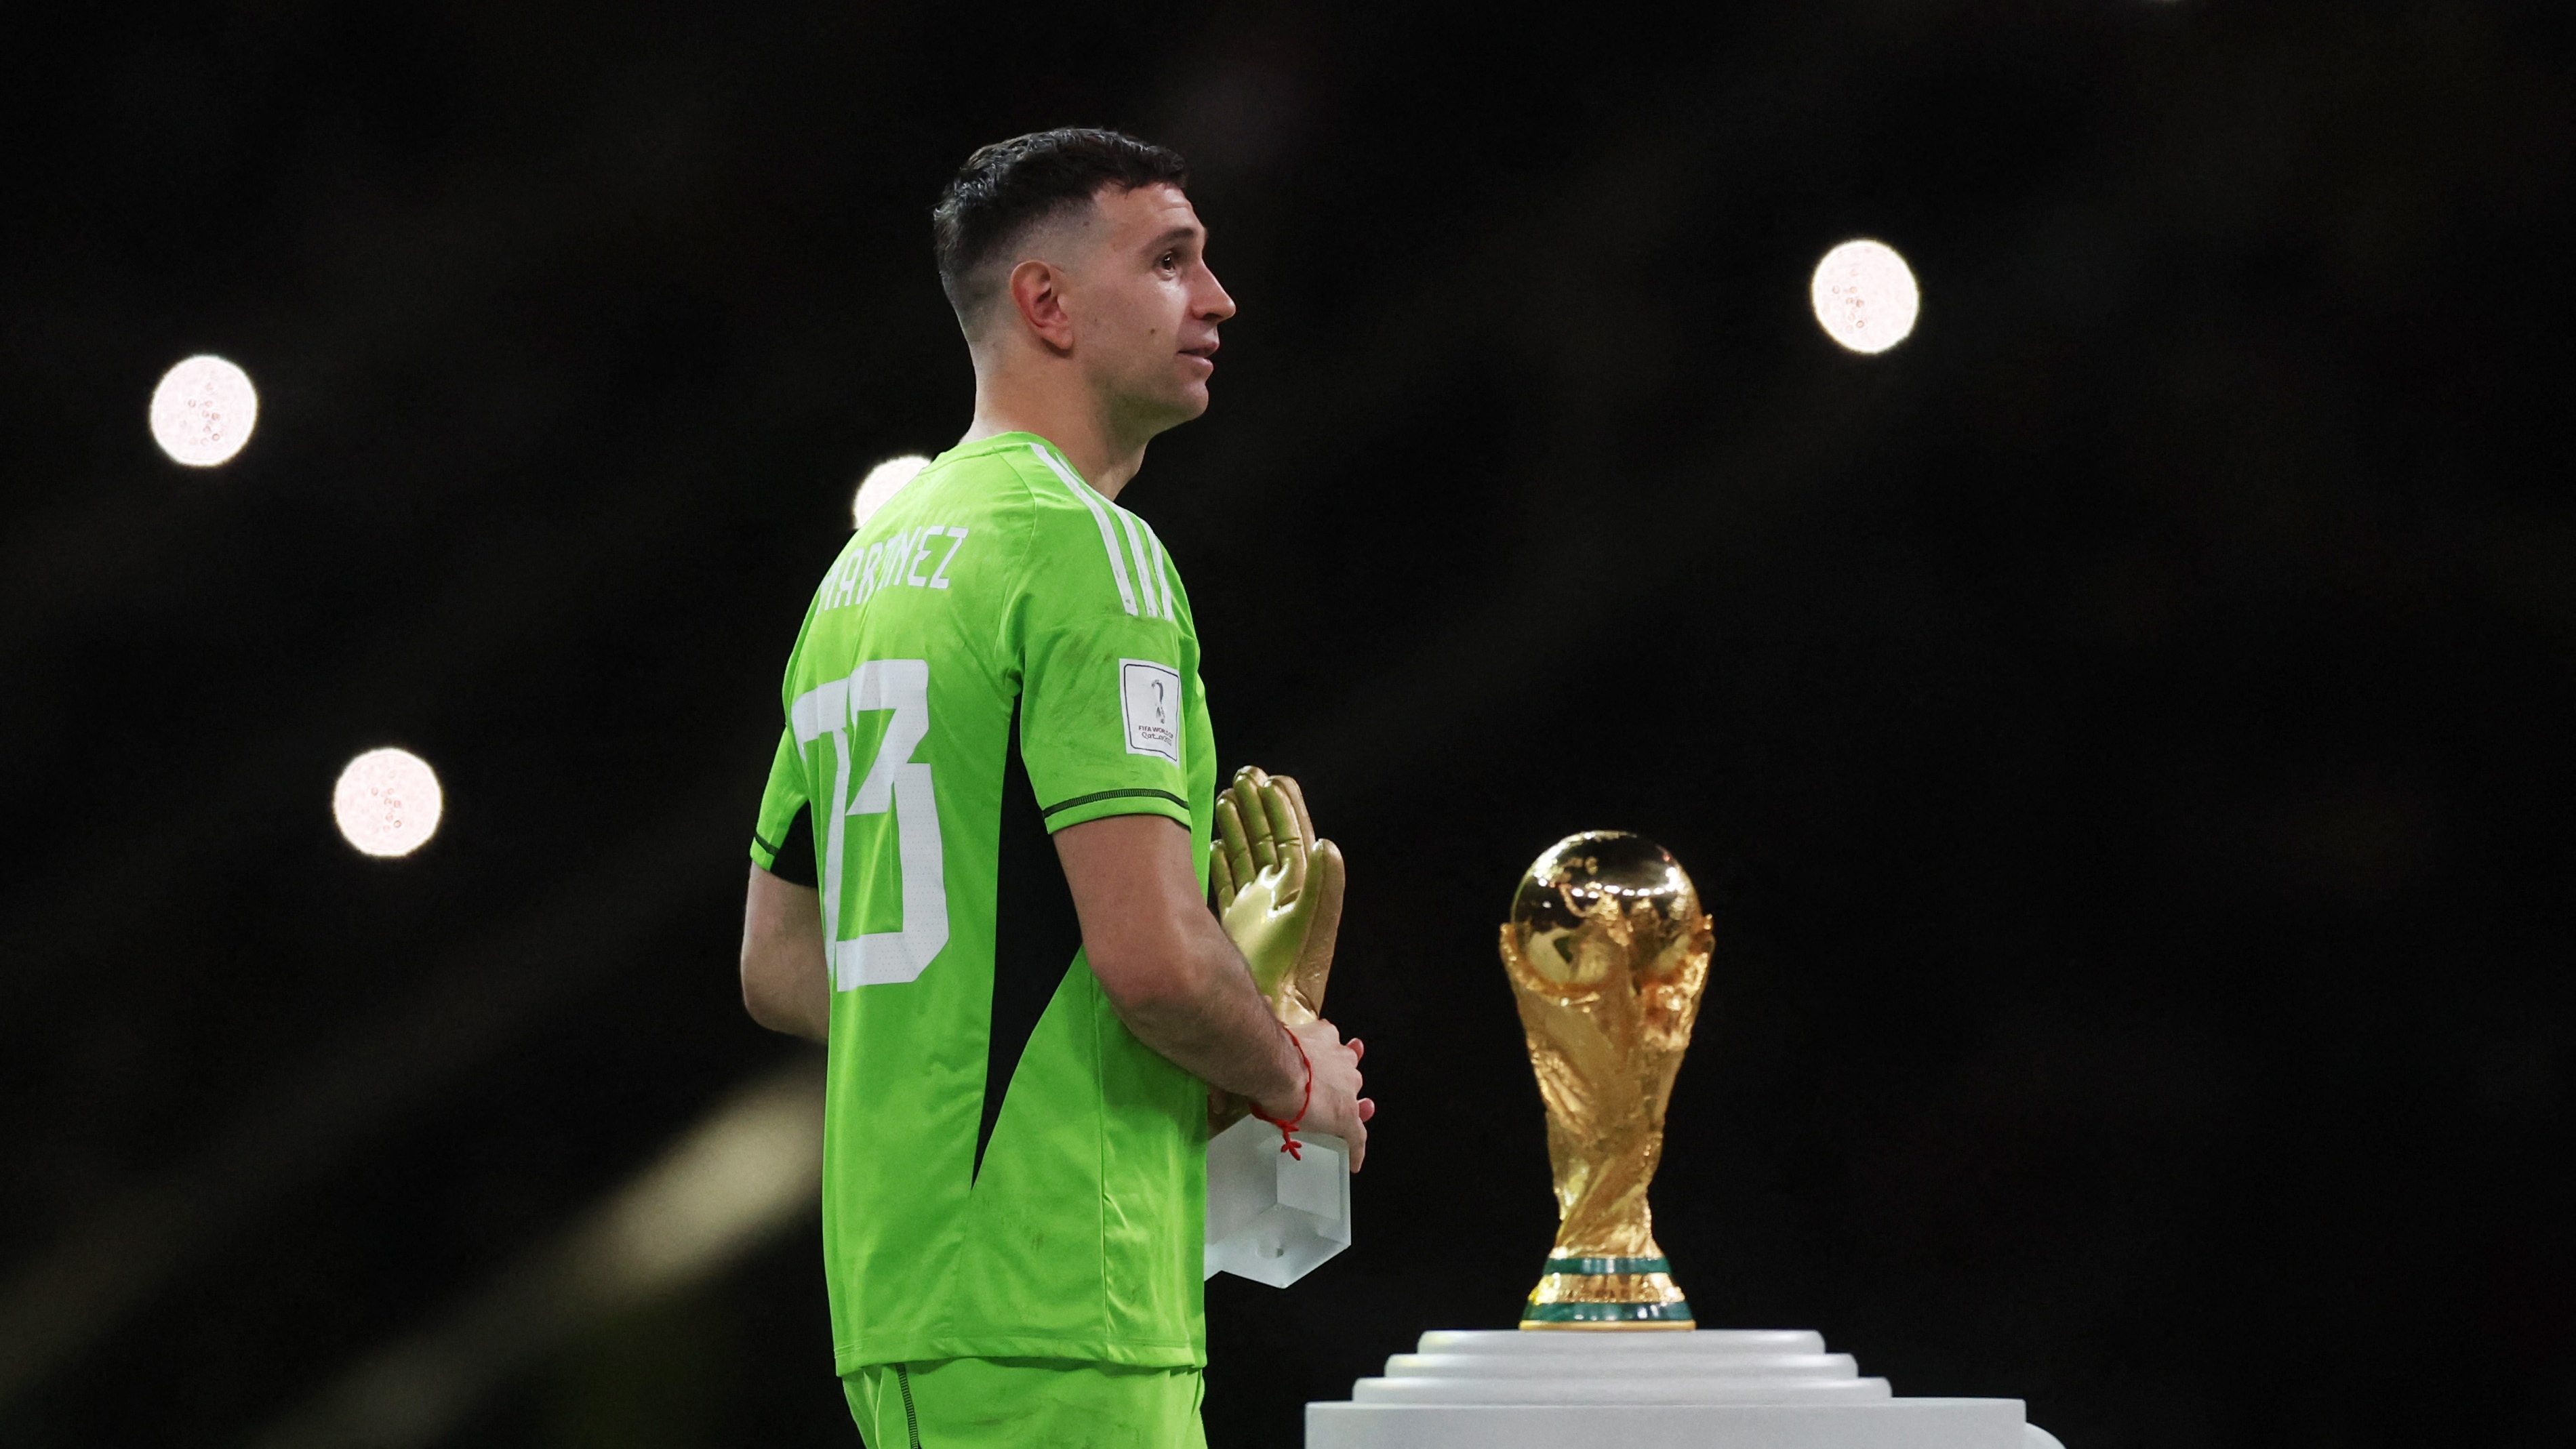 Soccer Football - FIFA World Cup Qatar 2022 - Final - Argentina v France - Lusail Stadium, Lusail, Qatar - December 18, 2022 Argentina's Emiliano Martinez walks pass the FIFA World Cup trophy after he is awarded the golden glove award during the trophy ceremony REUTERS/Lee Smith